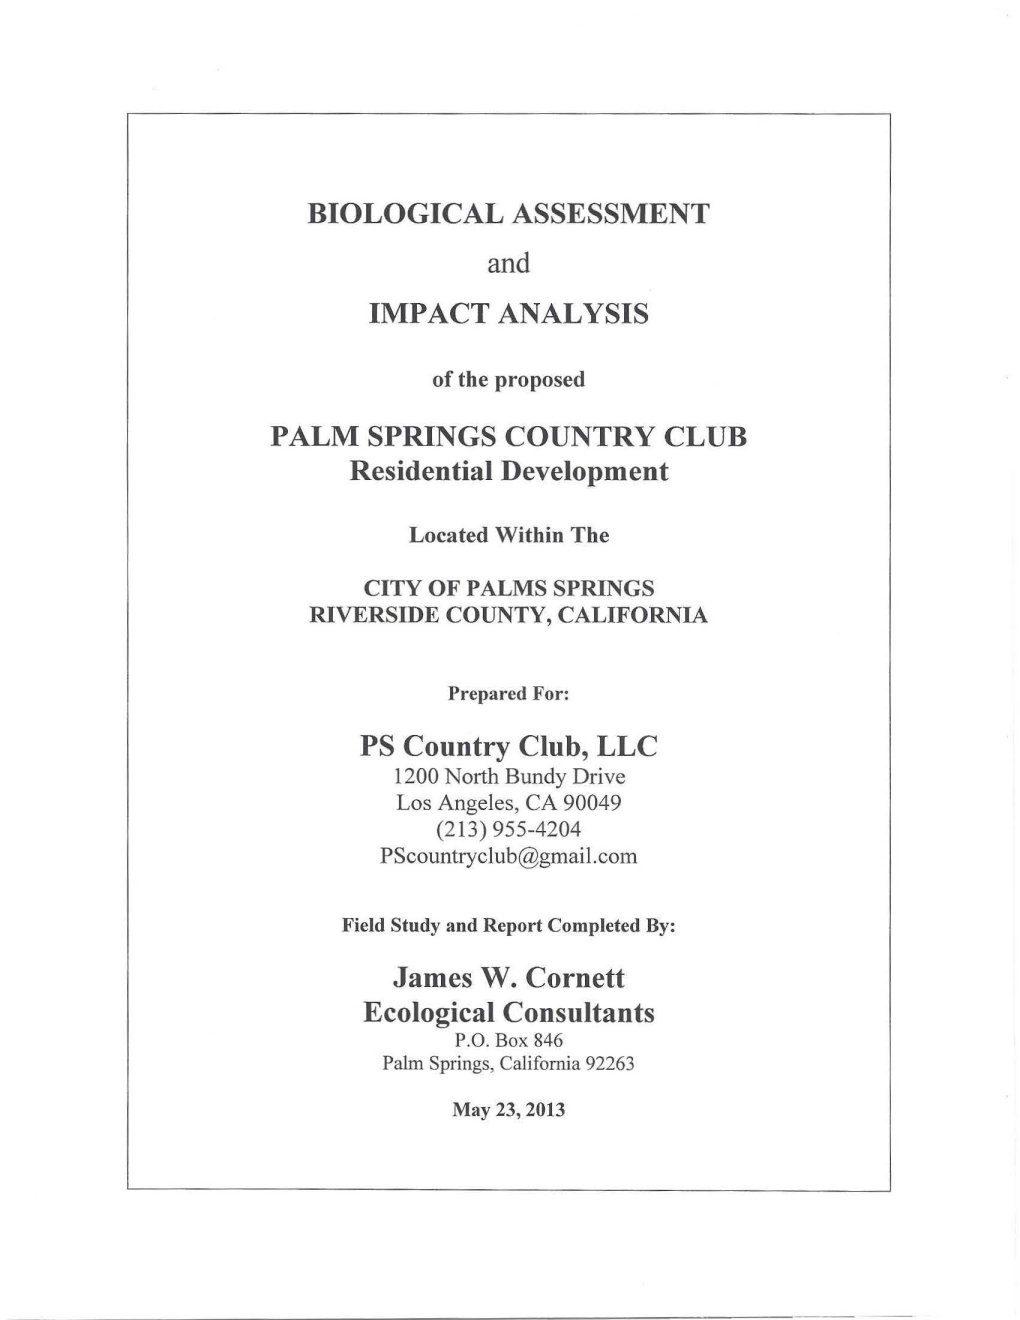 BIOLOGICAL ASSESSMENT and IMPACT ANALYSIS